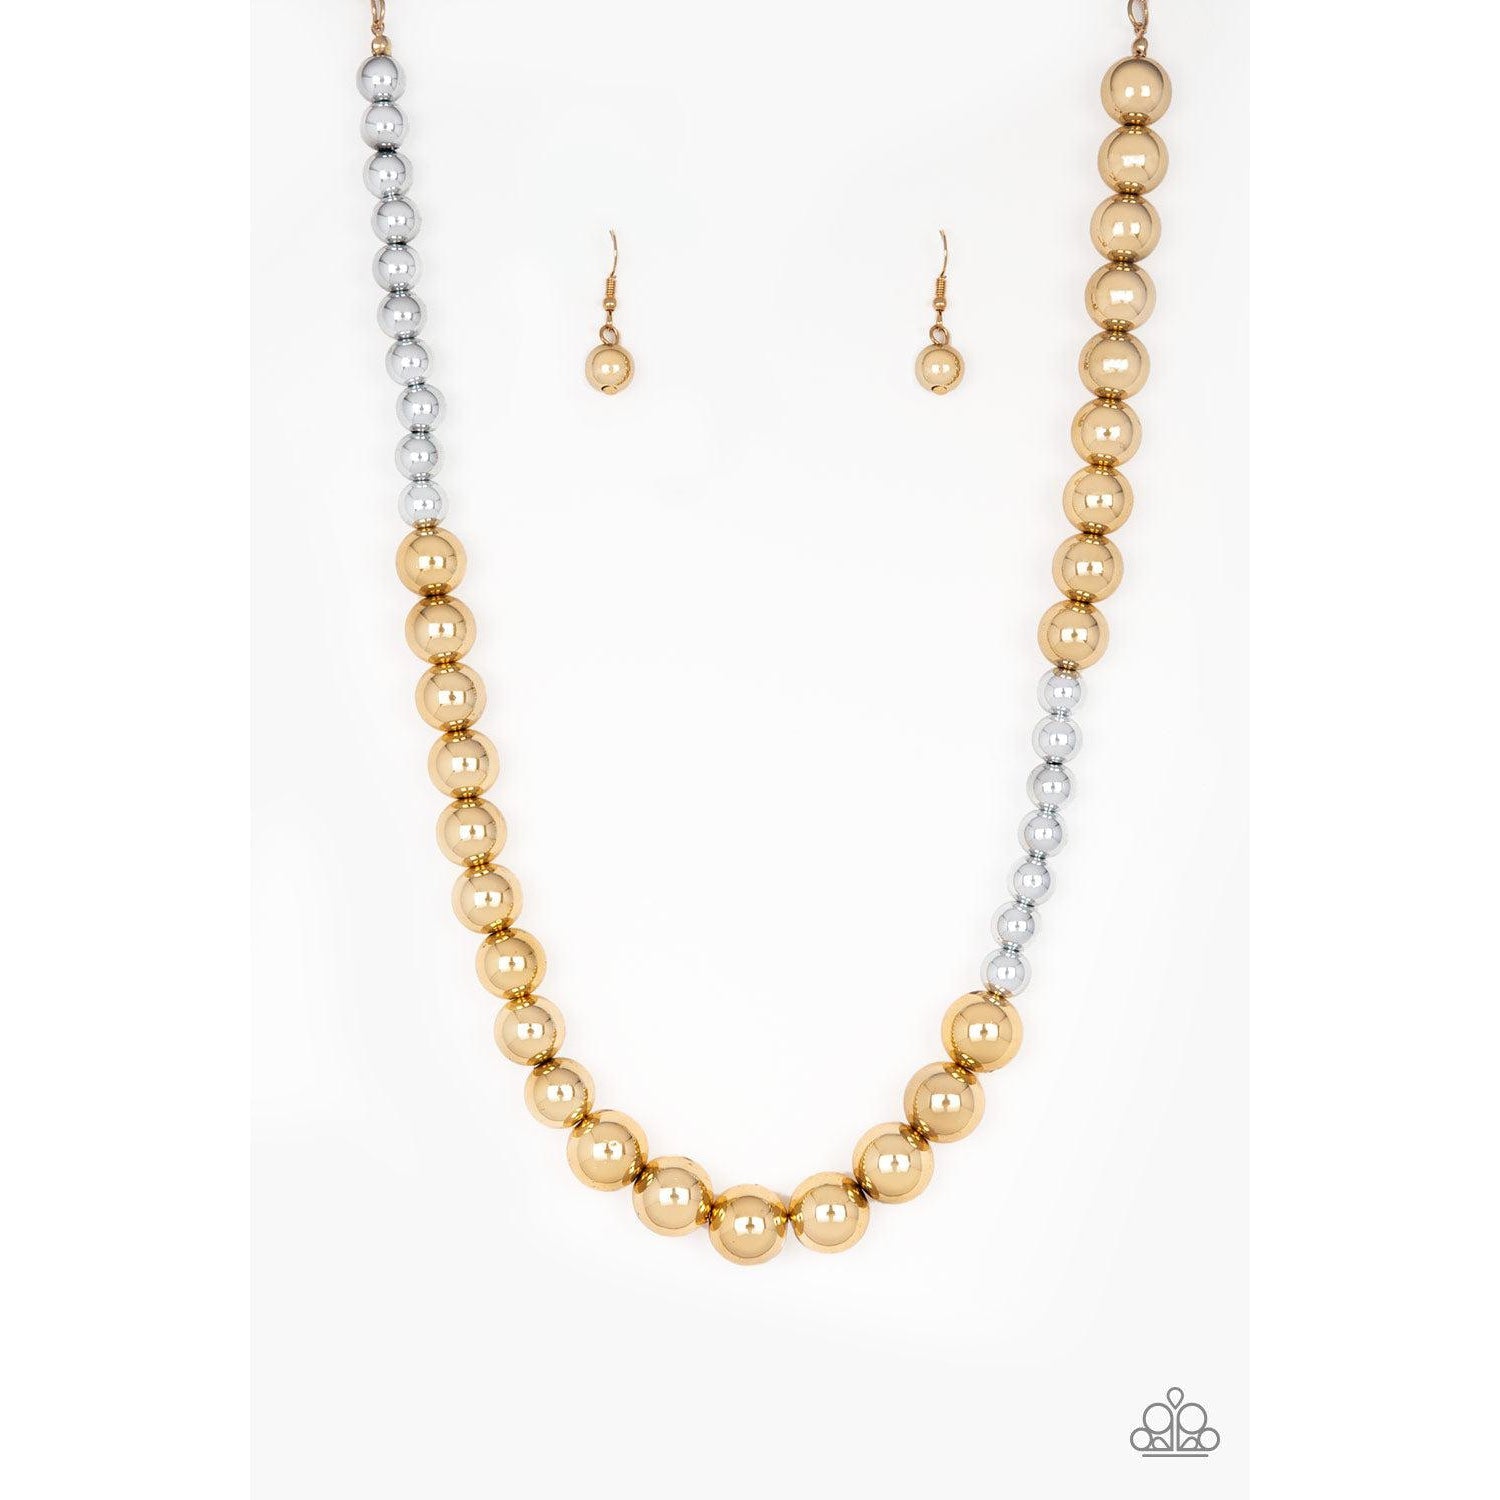 Paparazzi "Power To The People" Gold & Shimmery Silver Beads Necklace Earrings Set-Necklace-SPARKLE ARMAND